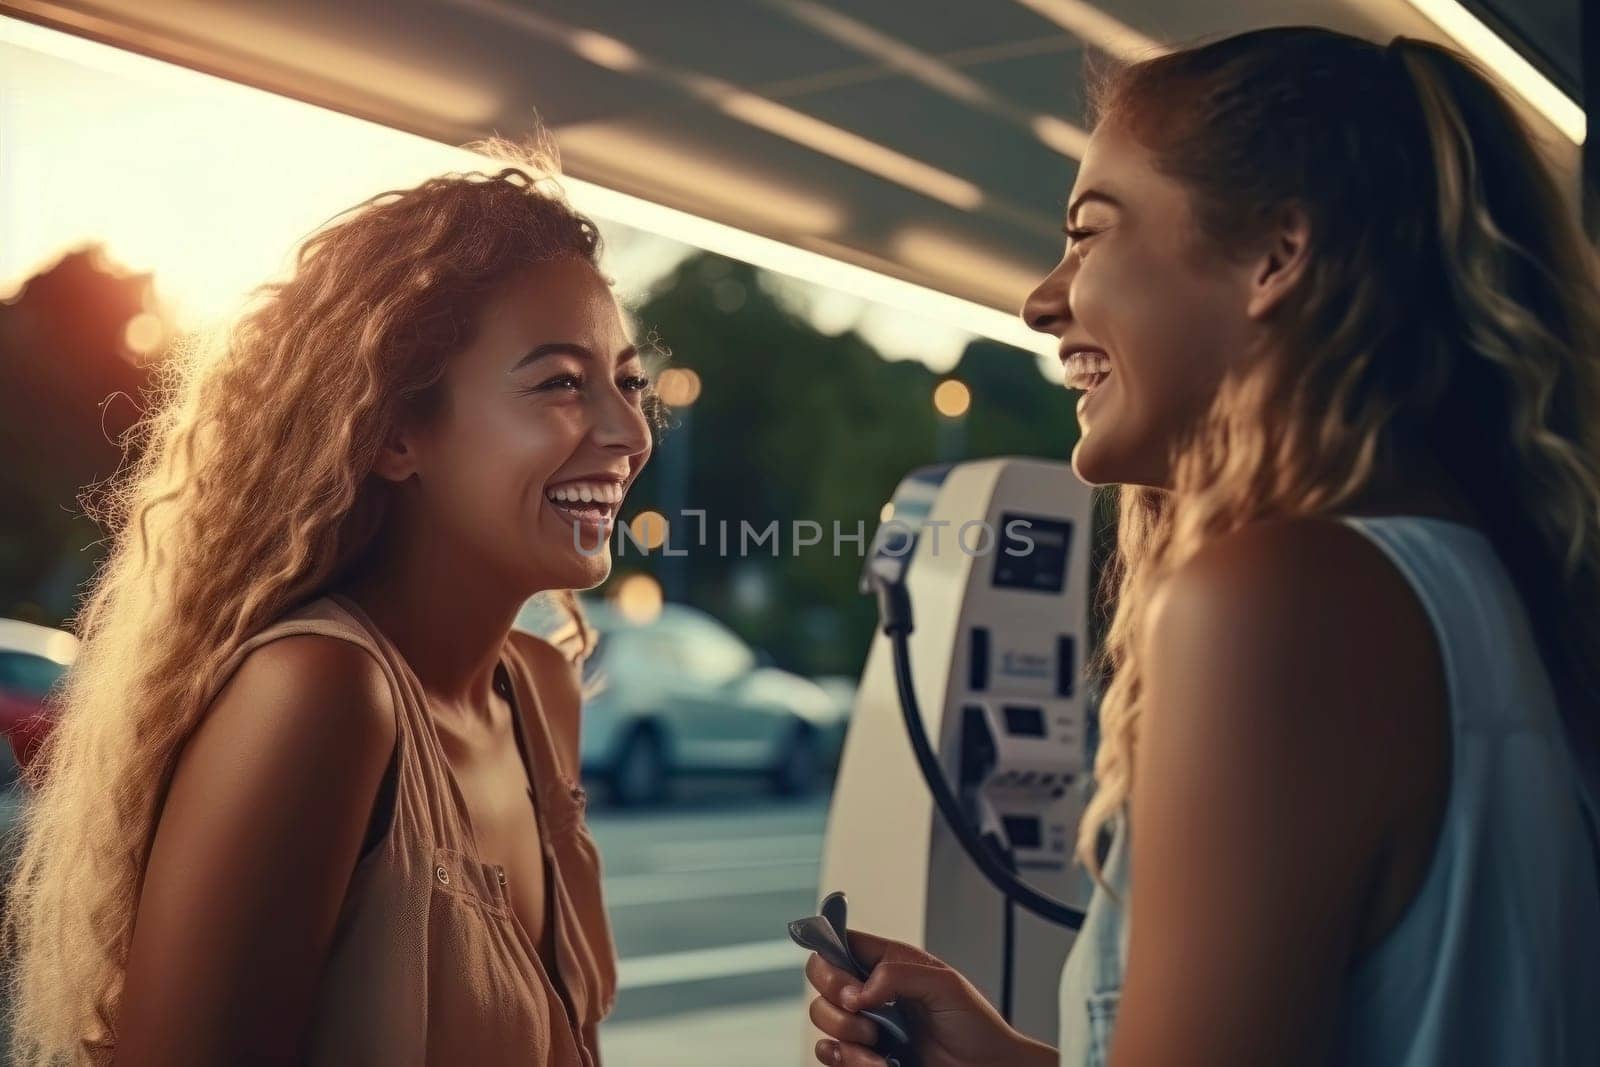 Image of jovial girls engaging in cheerful conversation during a city meet.